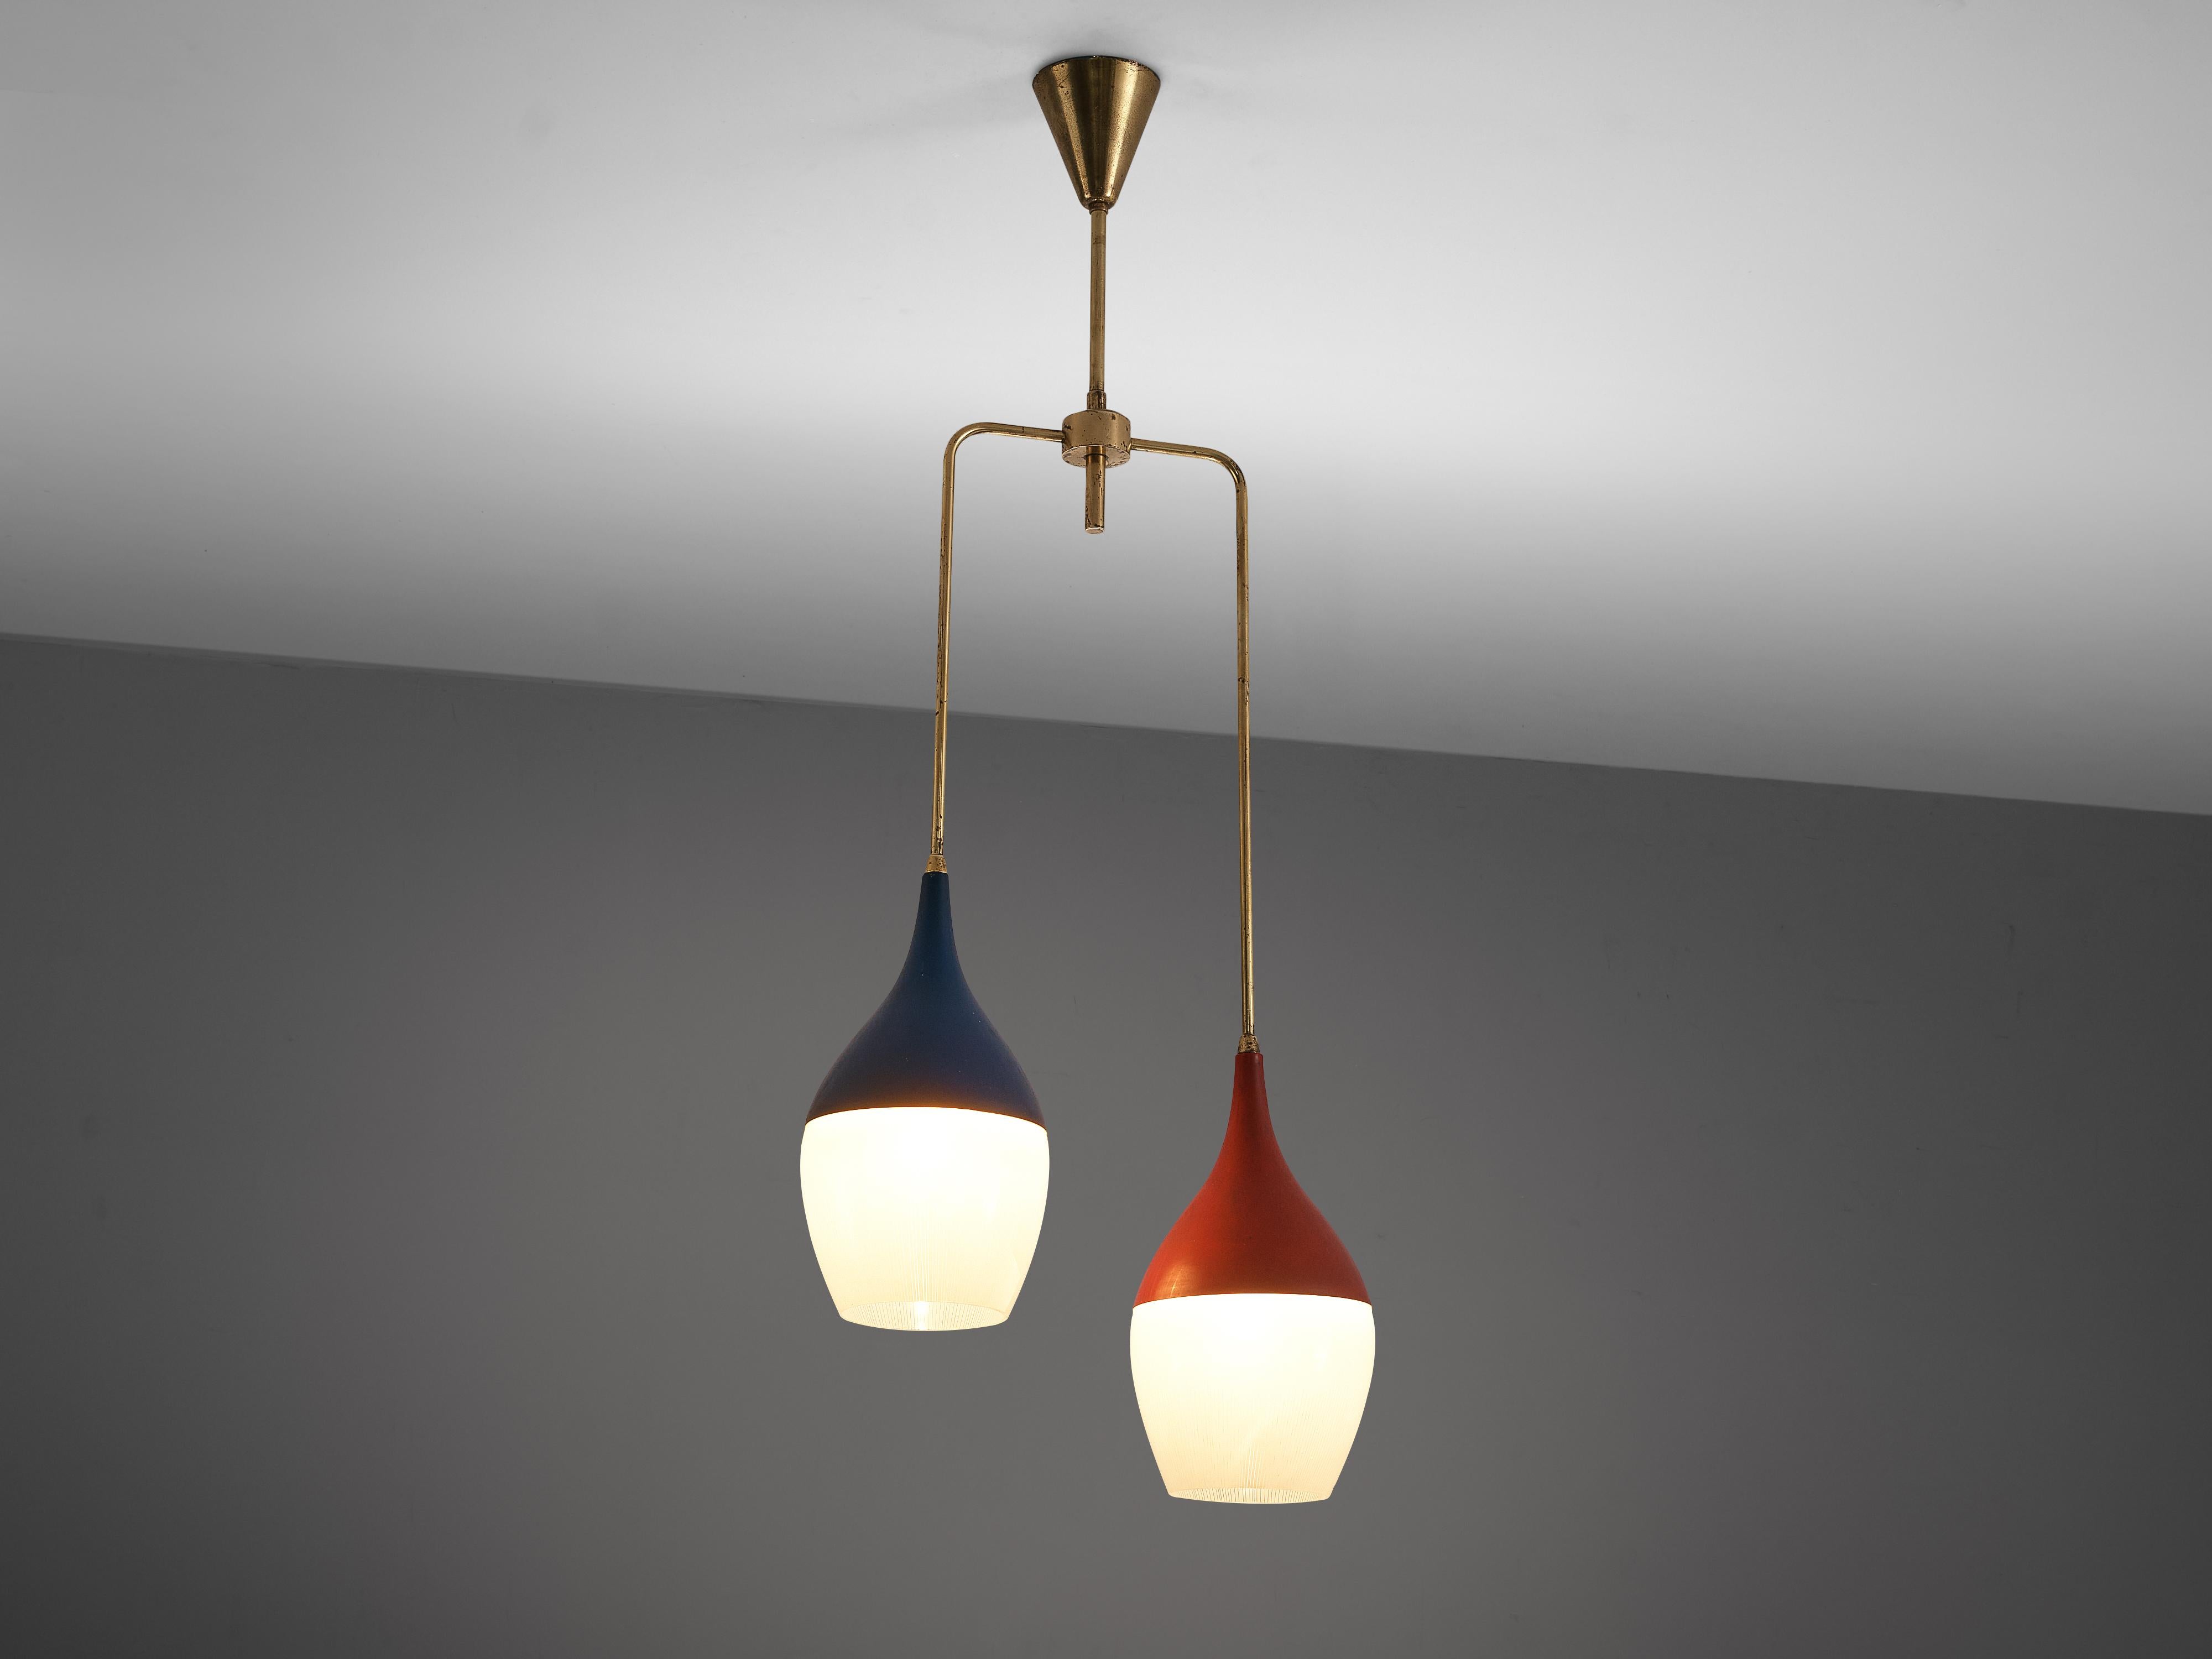 Stilnovo, pendants, metal, glass, brass, Italy, 1950s

Elegant pendant lamps by Italian manufacturer Stilnovo. The shades show beautiful curves: the narrow upper body with a blue and red top elegantly develops into a wider shape in off-white glass